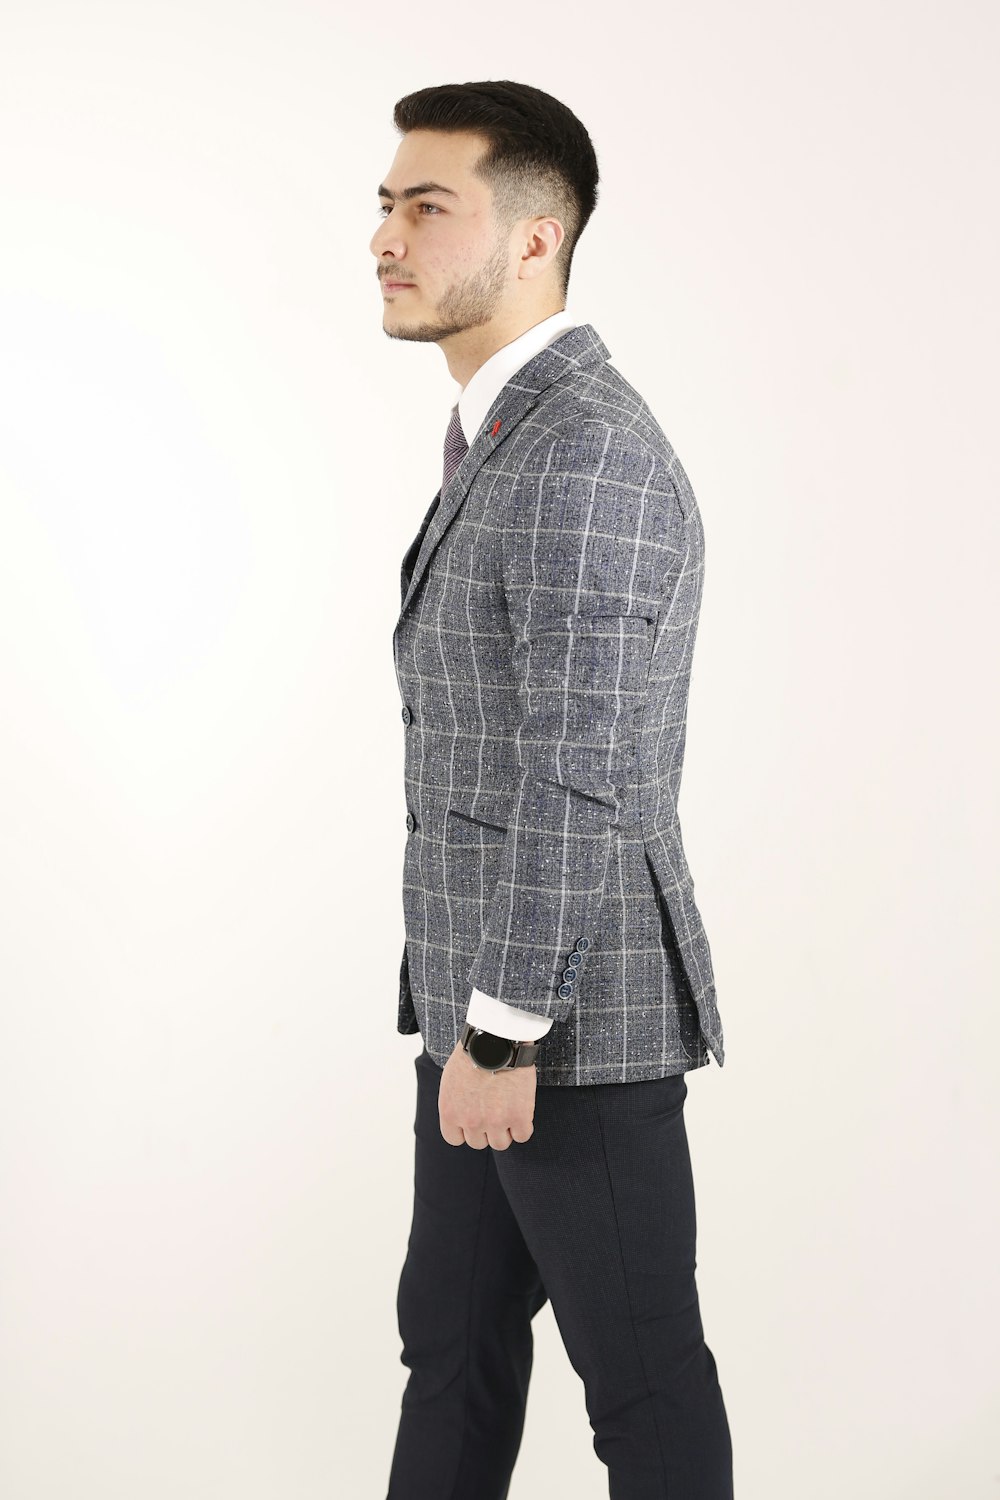 man in gray and black plaid blazer standing